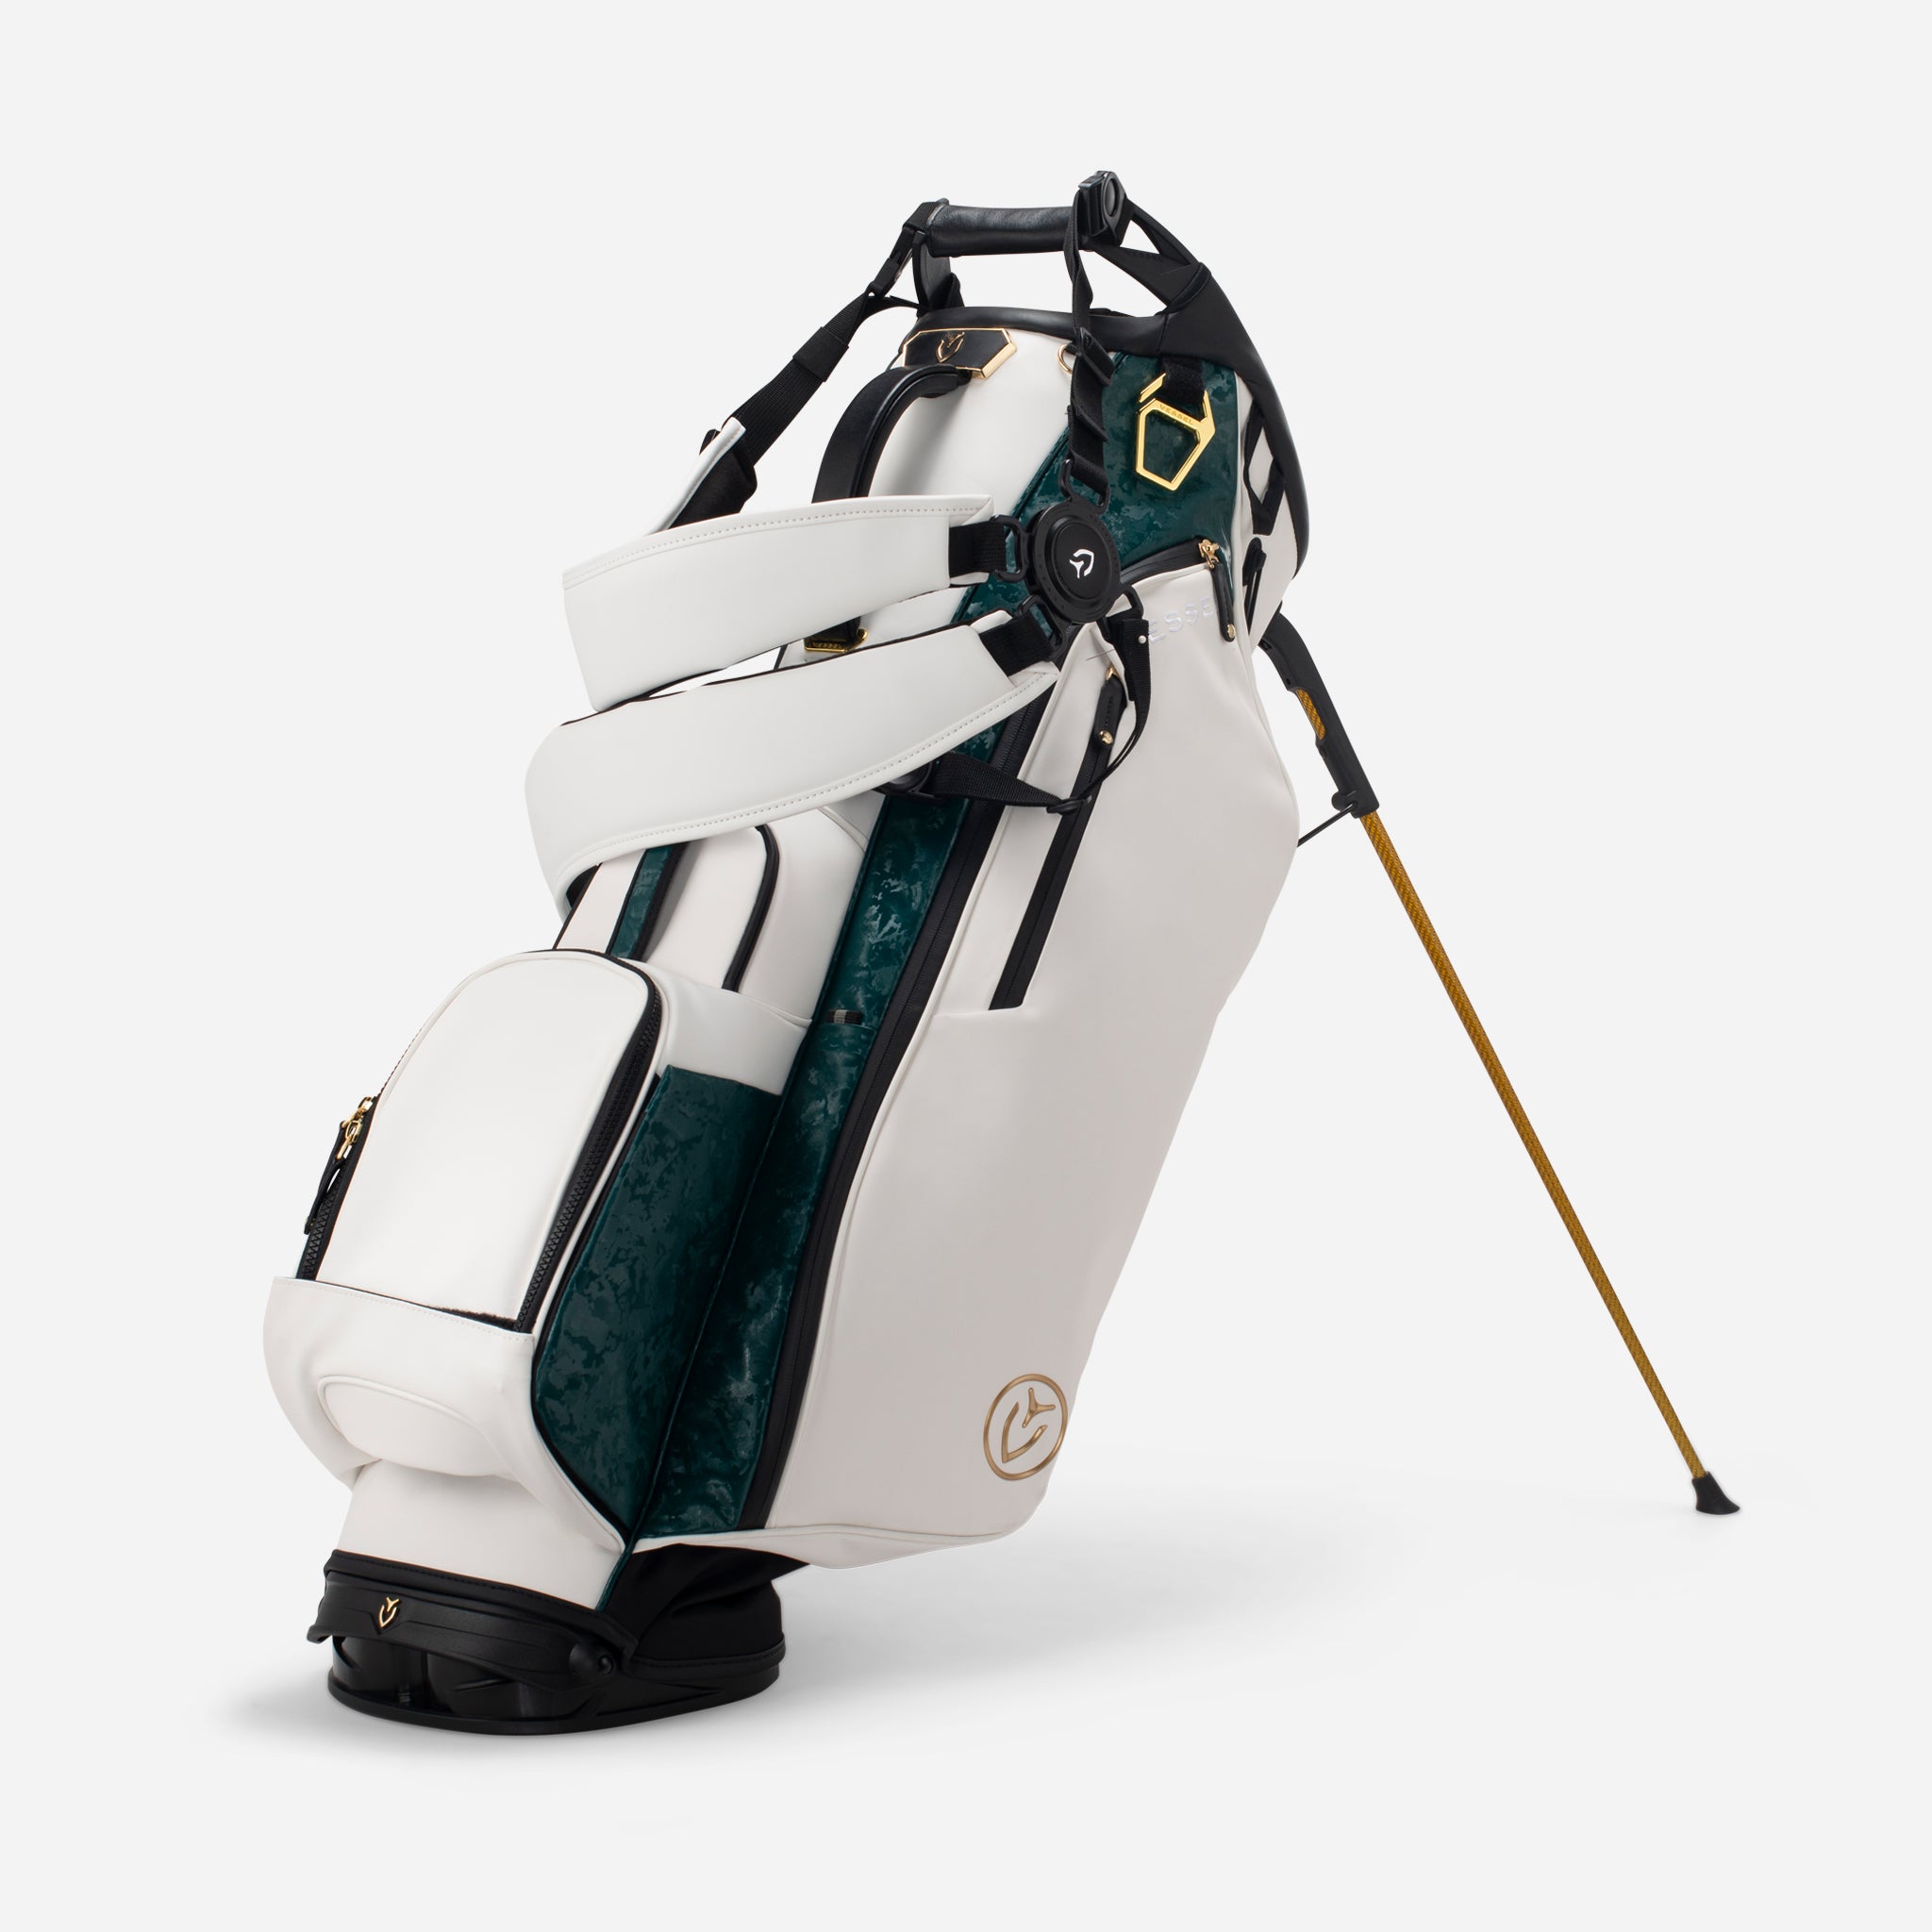 Peoples Golf Vessel Player IV Stand Bag